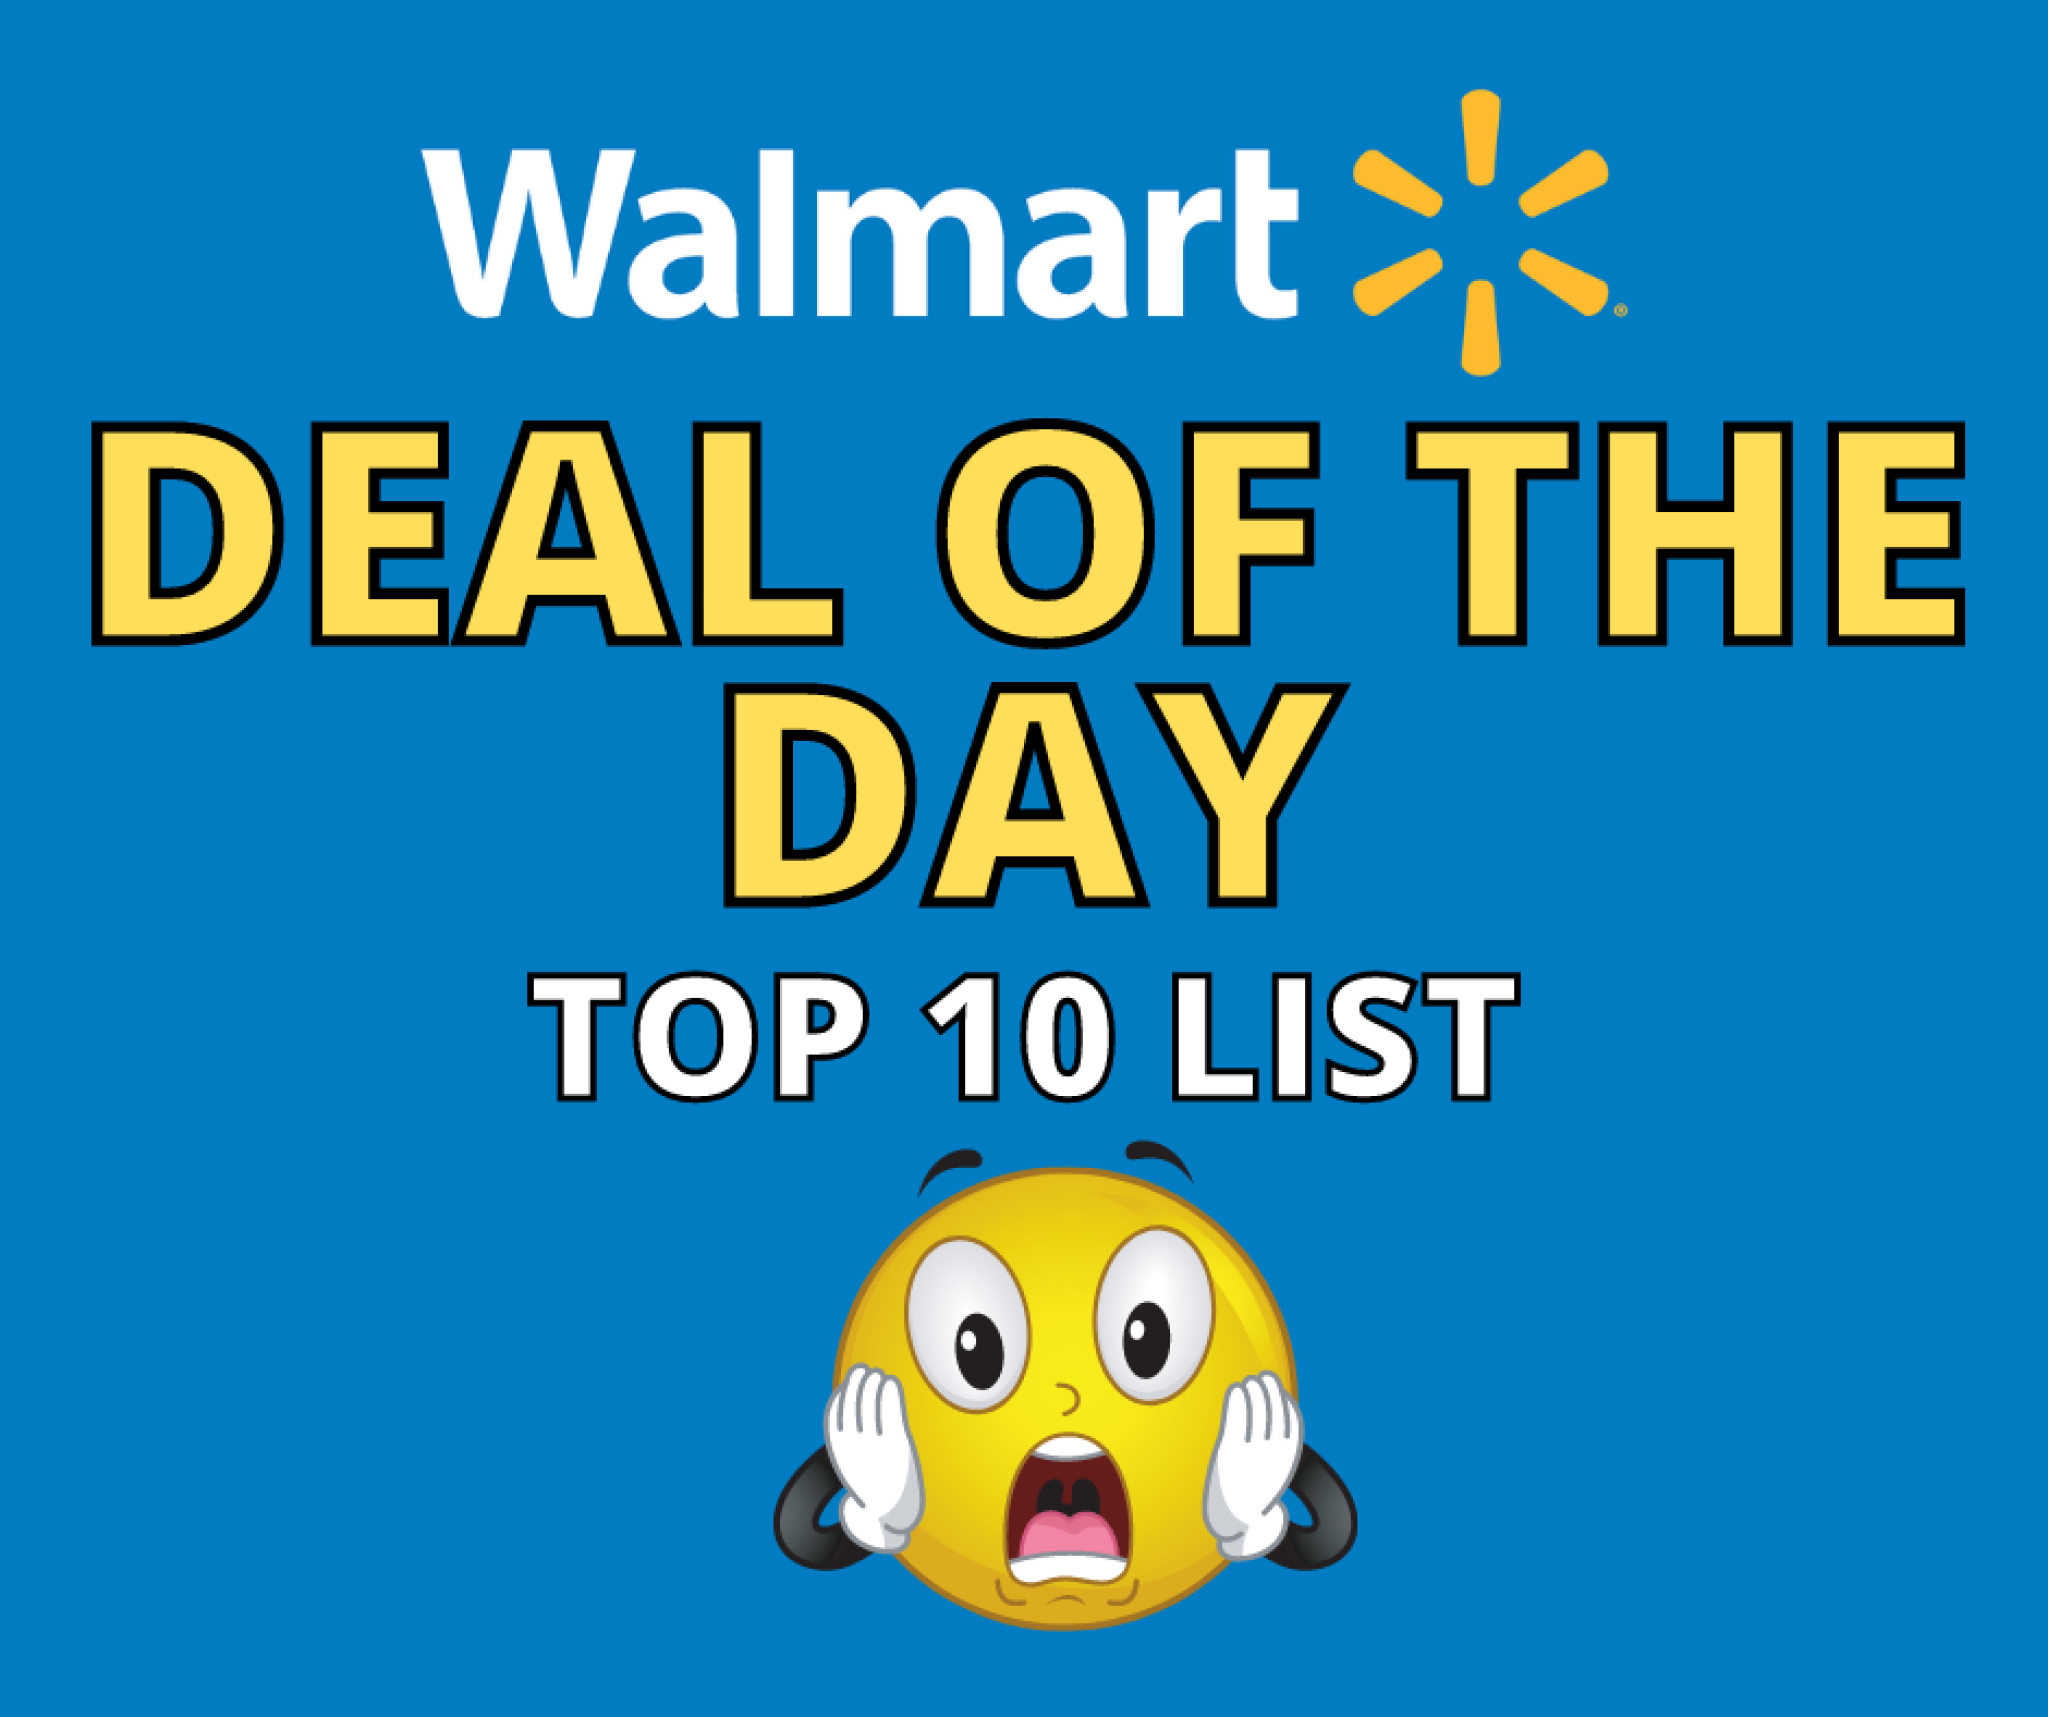 Walmart Deal Of The Day TOP 10 List